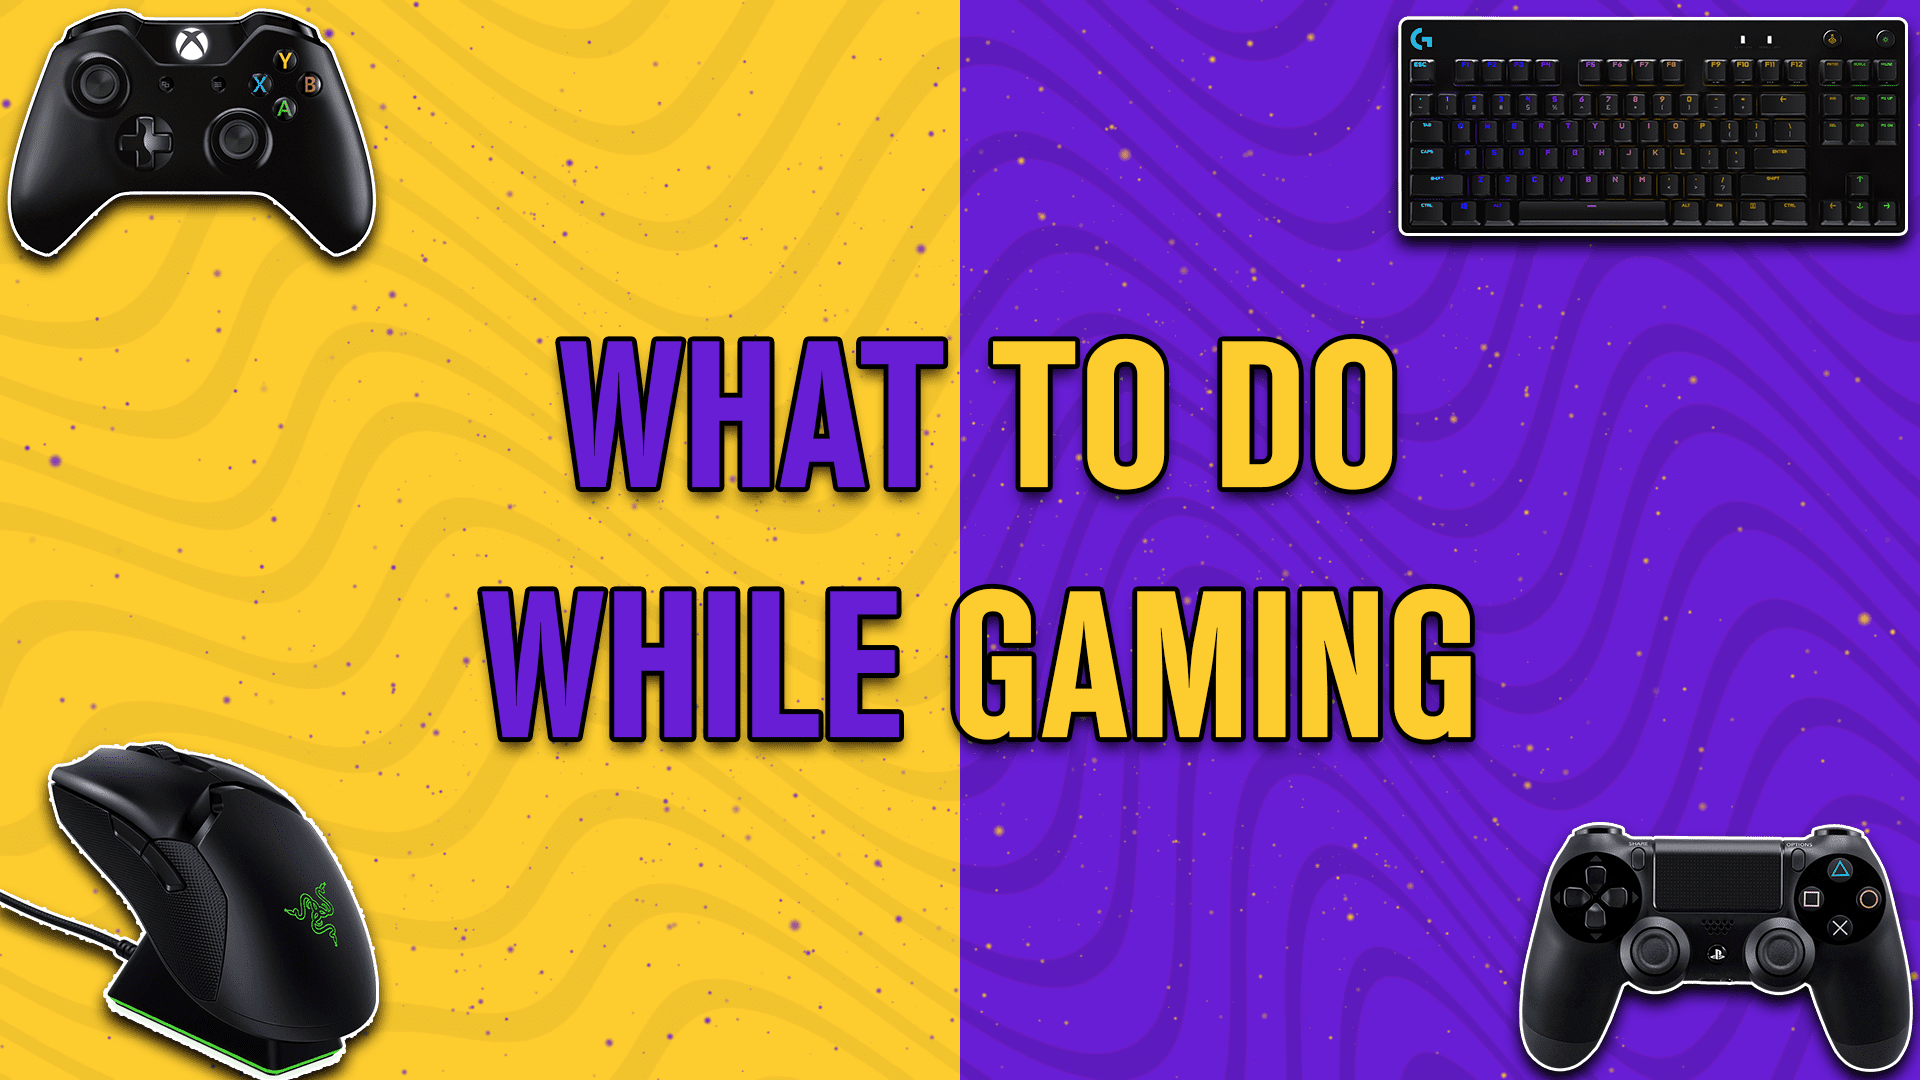 What to do while gaming - StreamBee